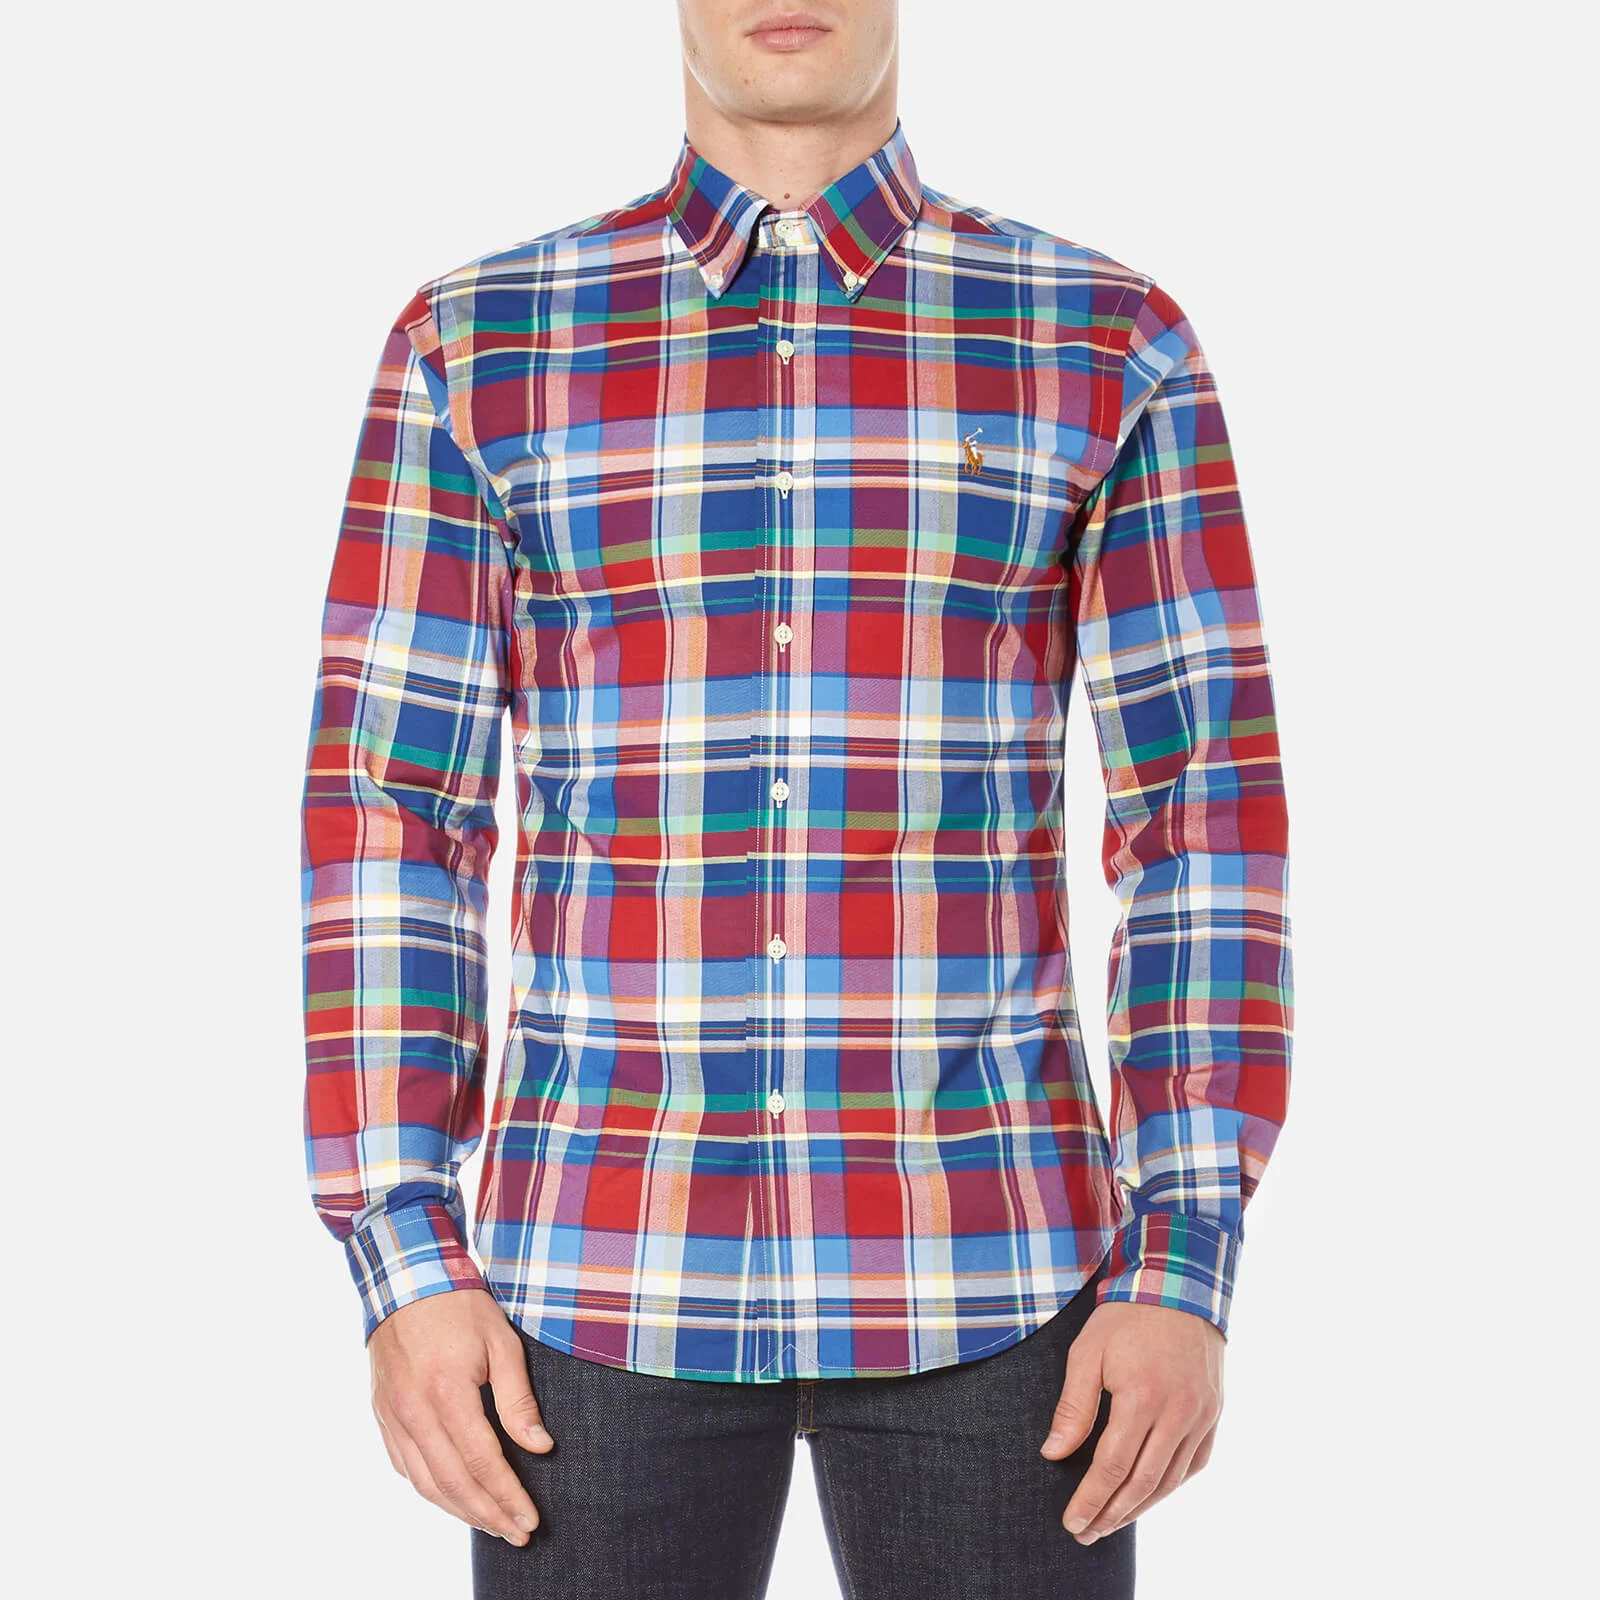 Polo Ralph Lauren Men's Long Sleeve Checked Stretch Oxford Shirt - Red/Blue Image 1